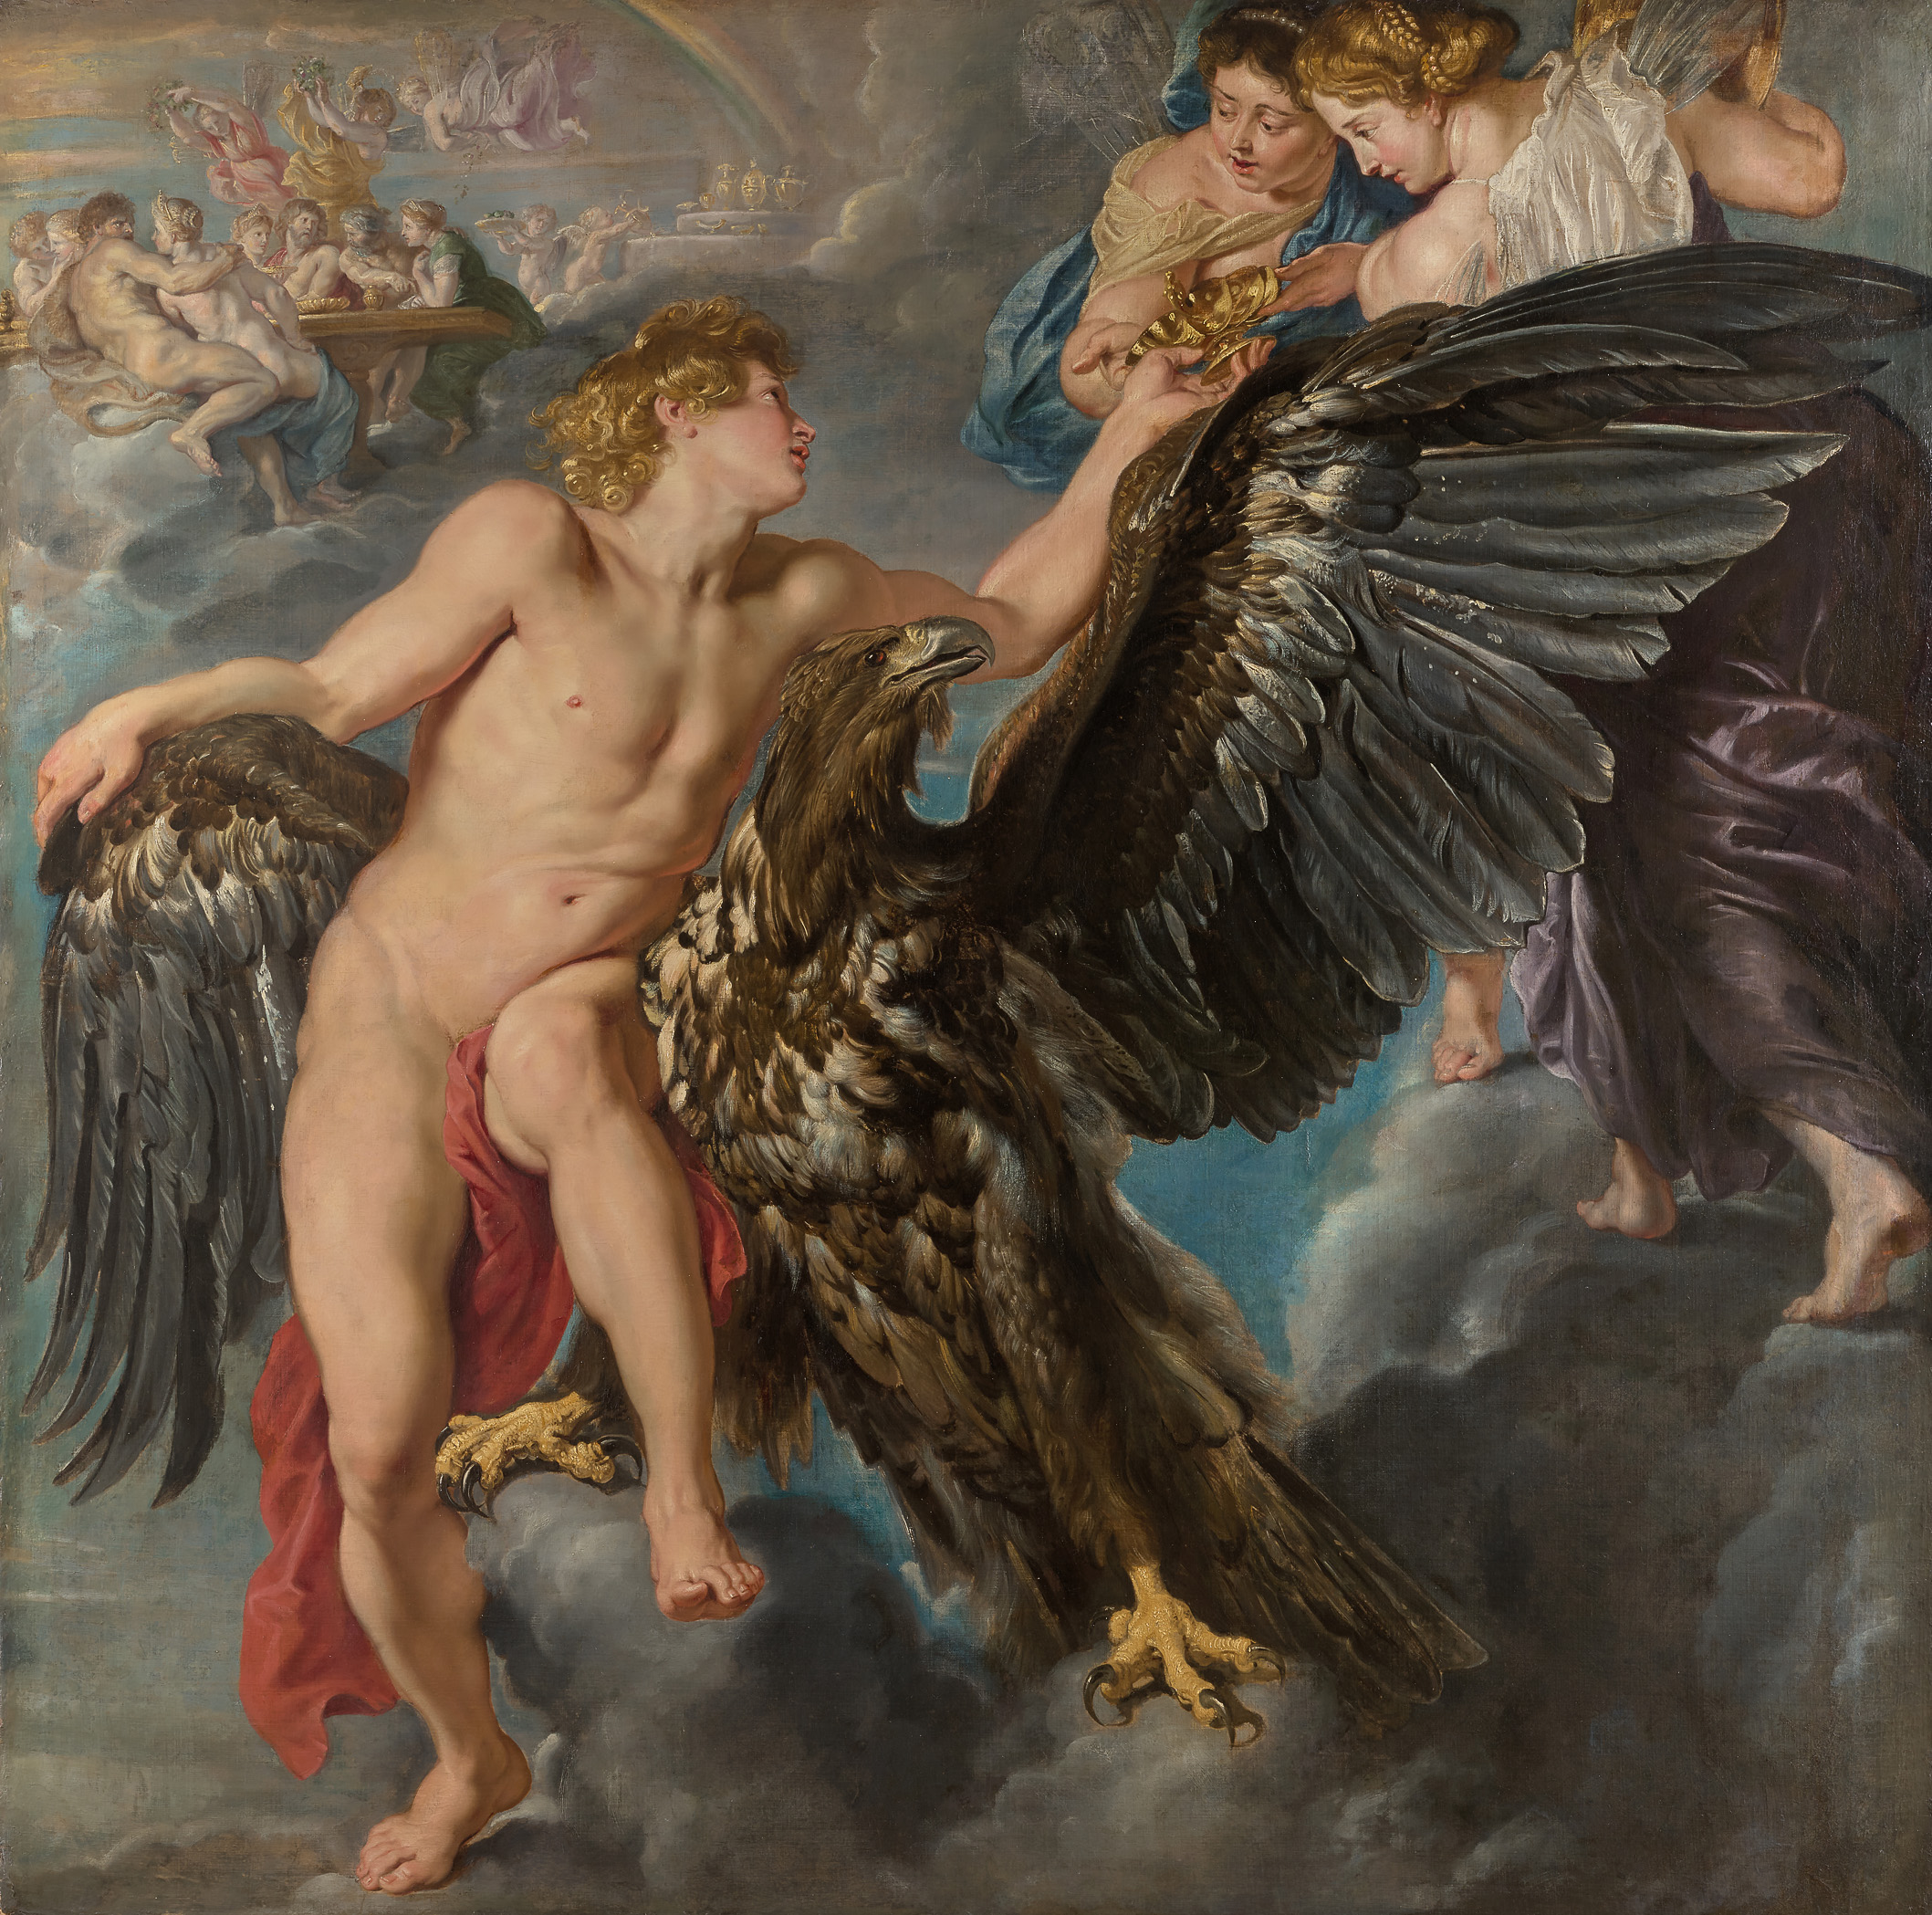 Peter Paul Rubens, Abduction of Ganymede (1611/12)